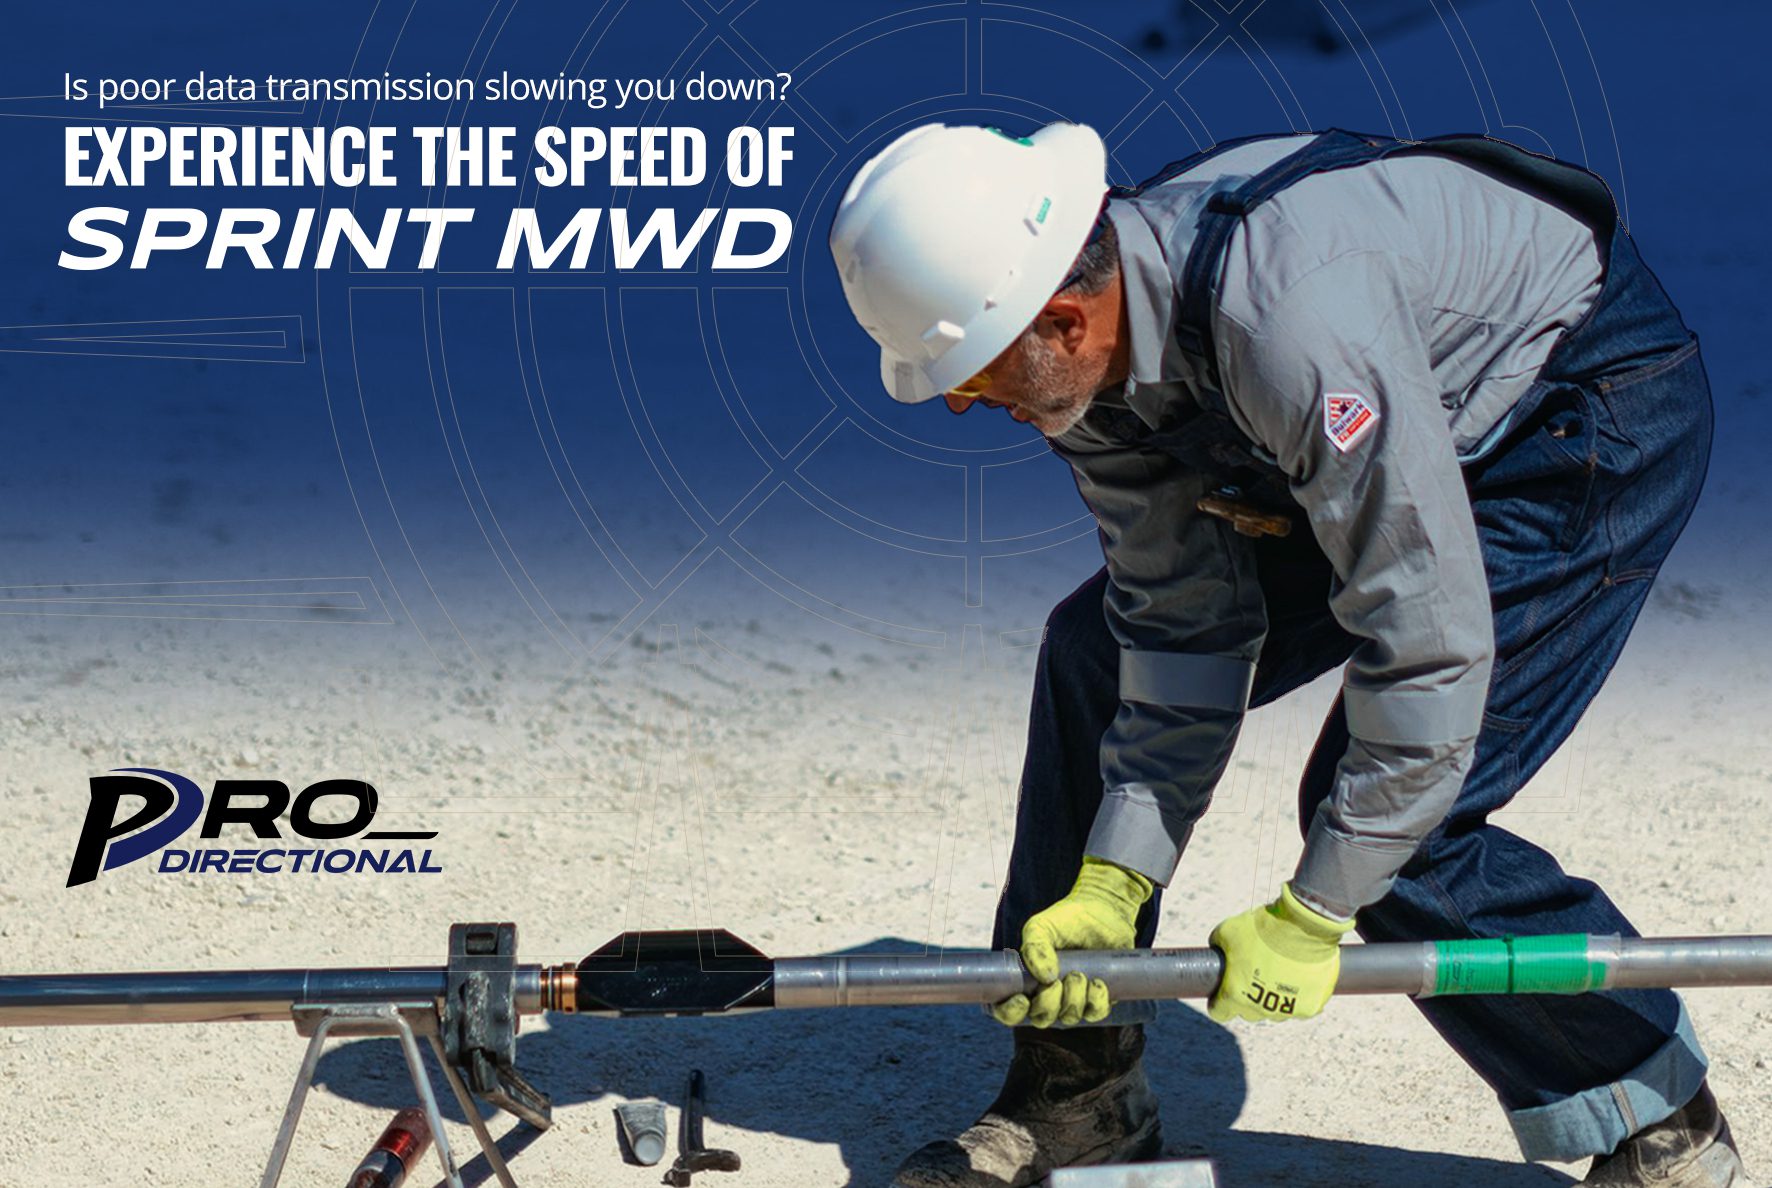 Featured image for “Experience the speed of Sprint MWD!”